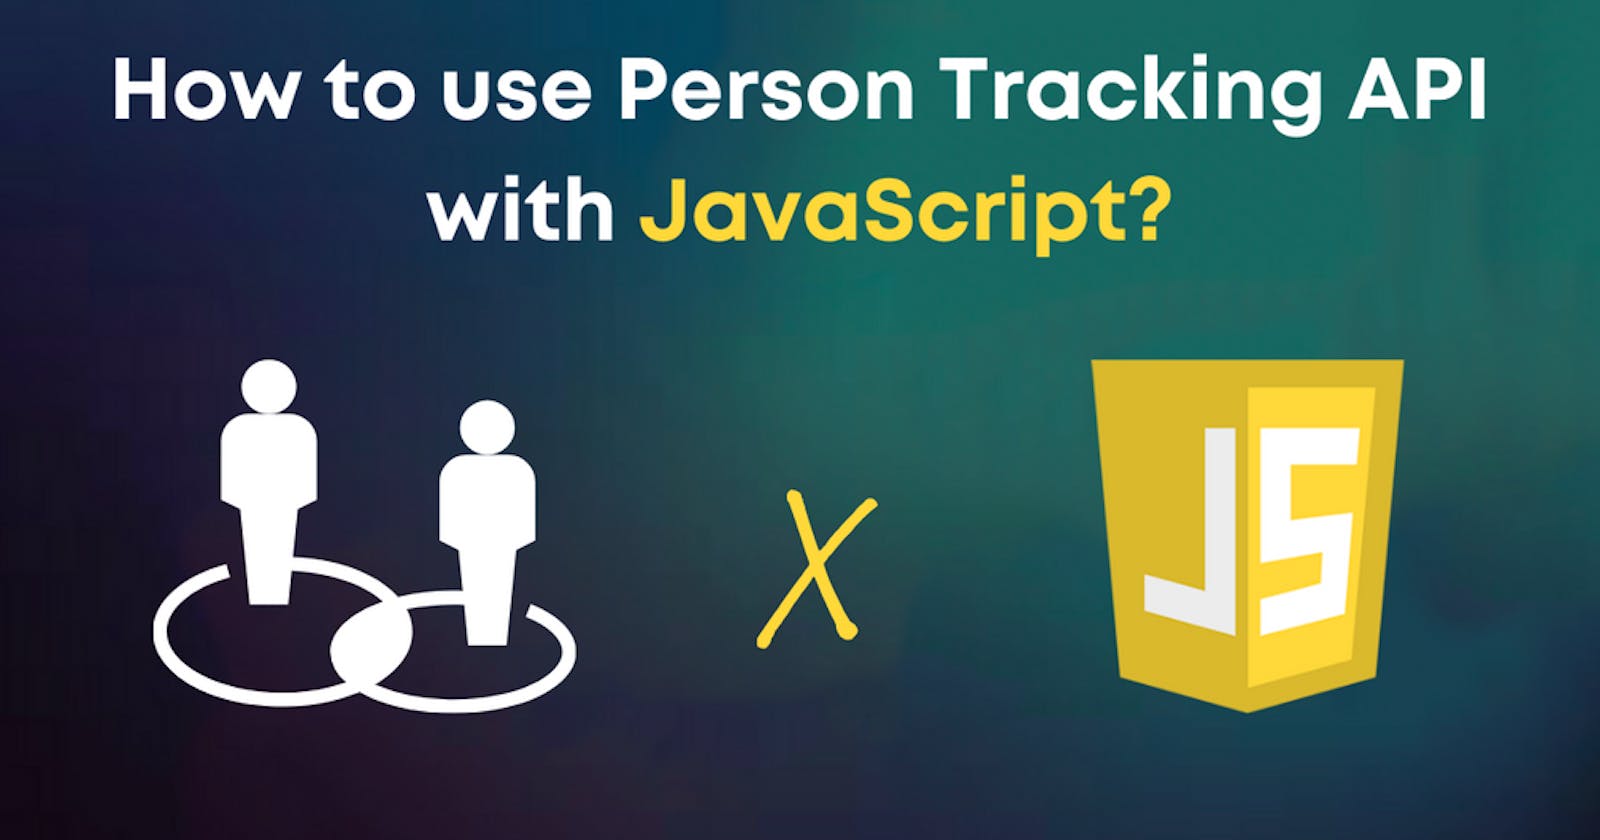 How to use Video Person Tracking API with JavaScript in 5 minutes?